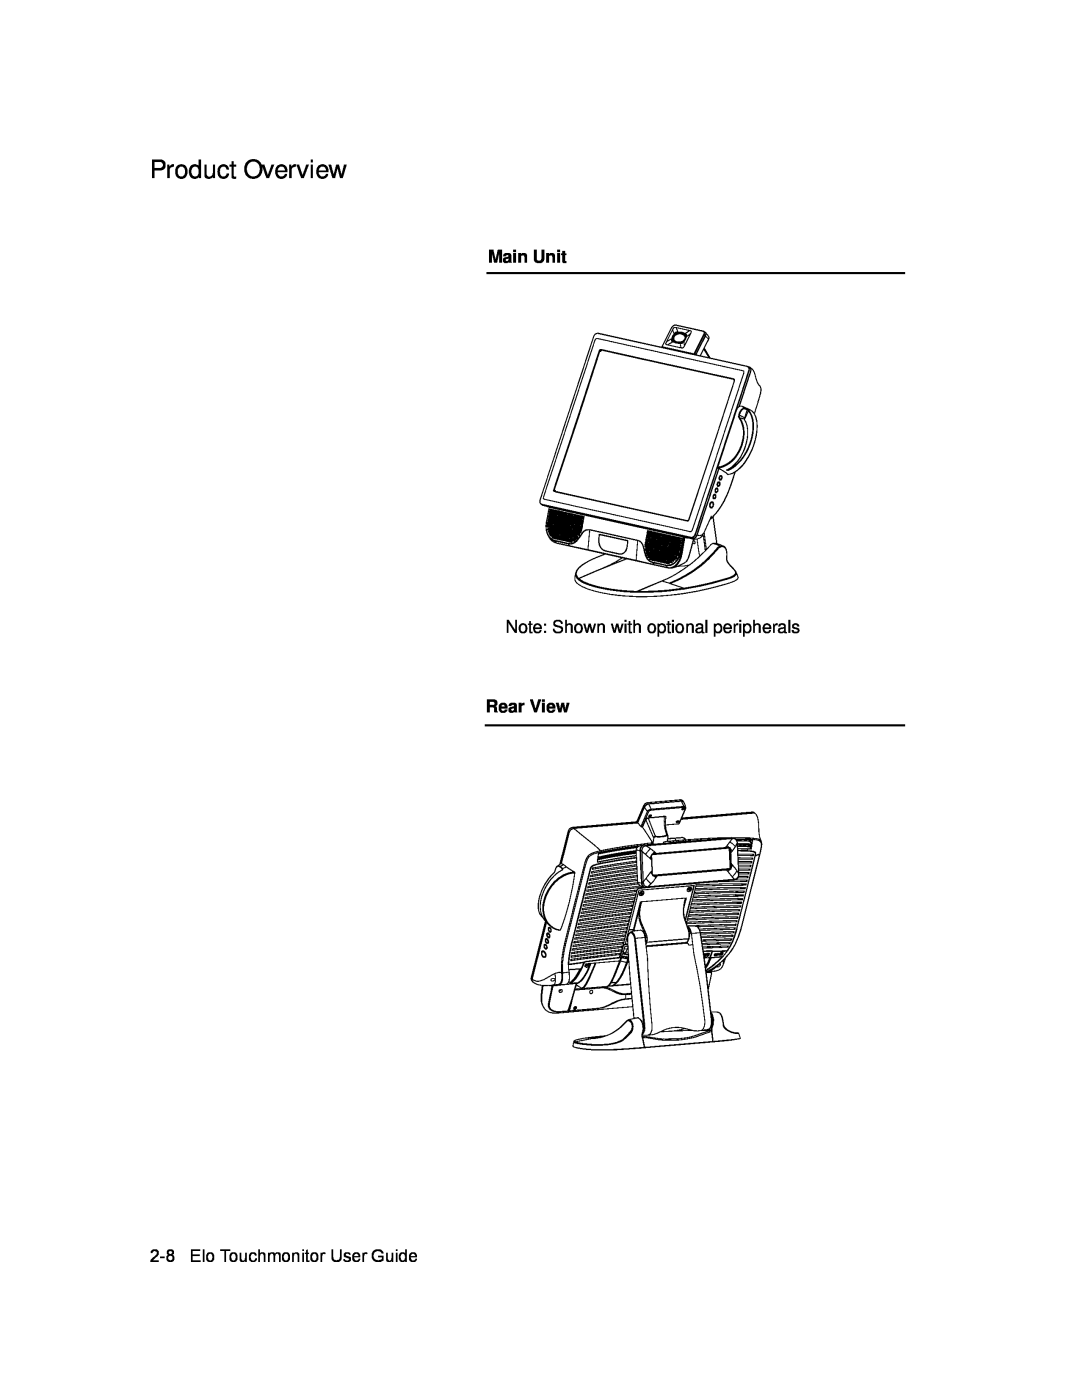 Elo TouchSystems 1729L manual Product Overview, Main Unit, Note Shown with optional peripherals, Rear View 